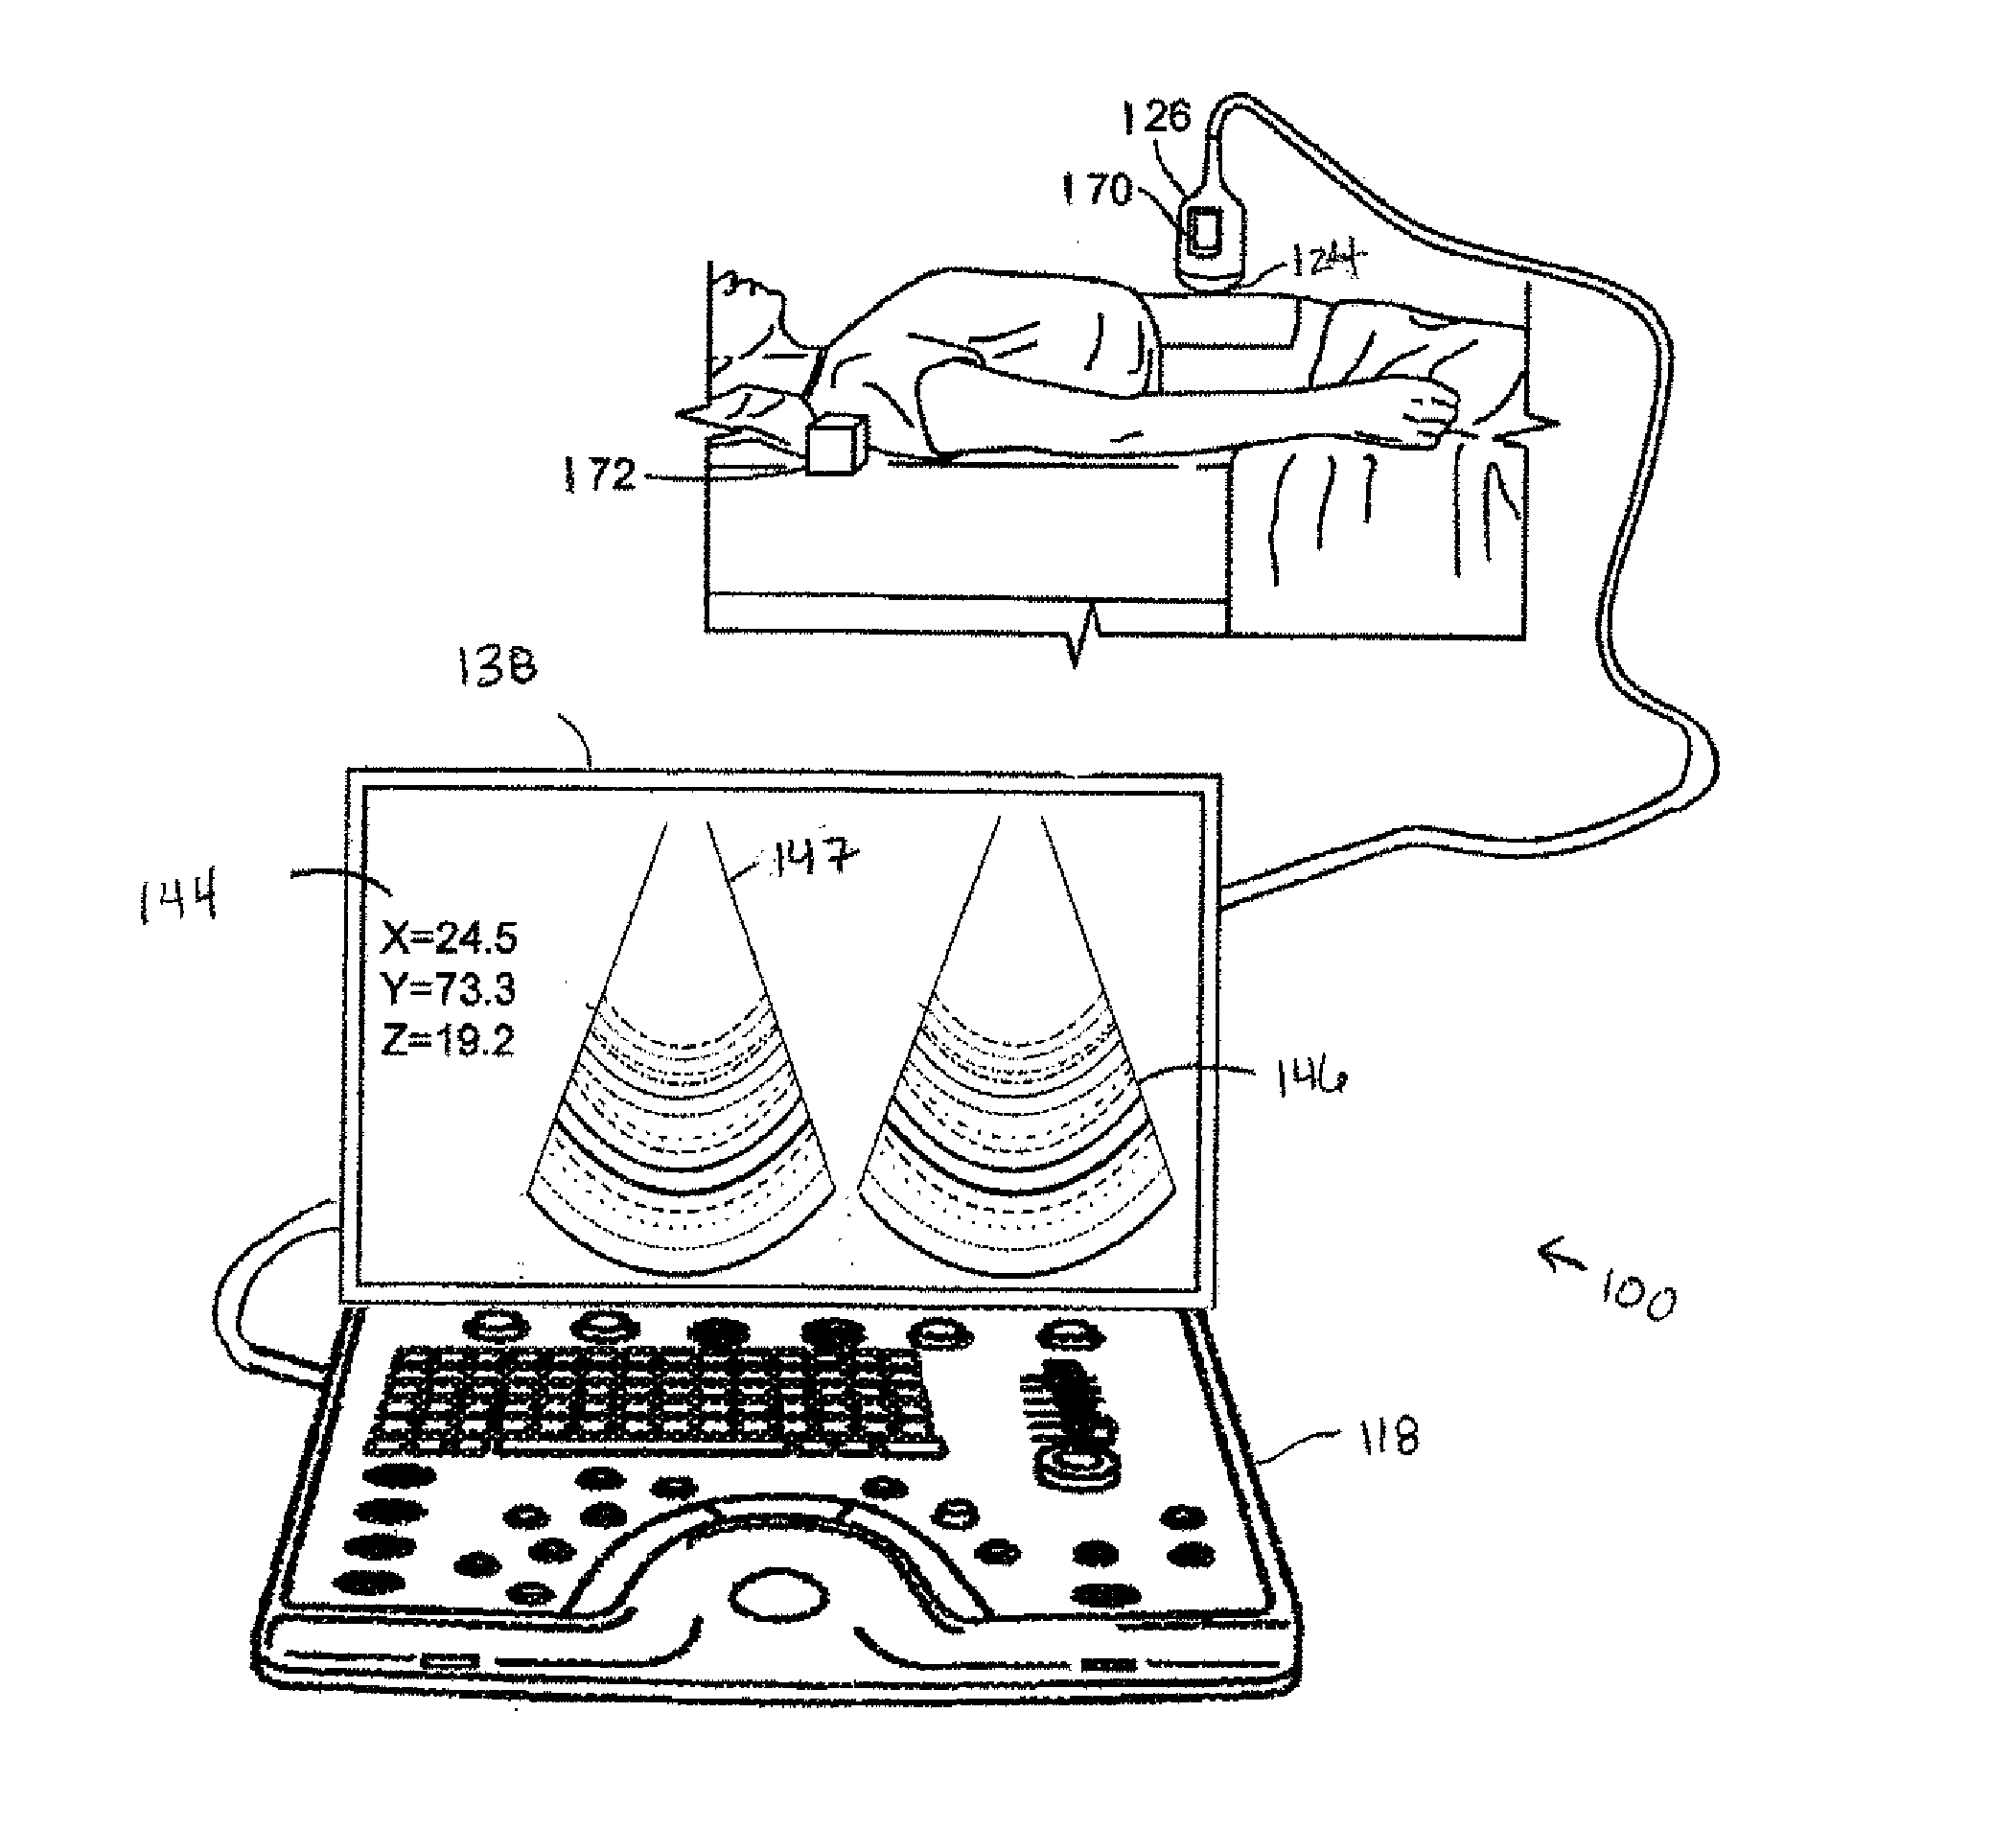 Methods and systems for display of shear-wave elastography and strain elastography images